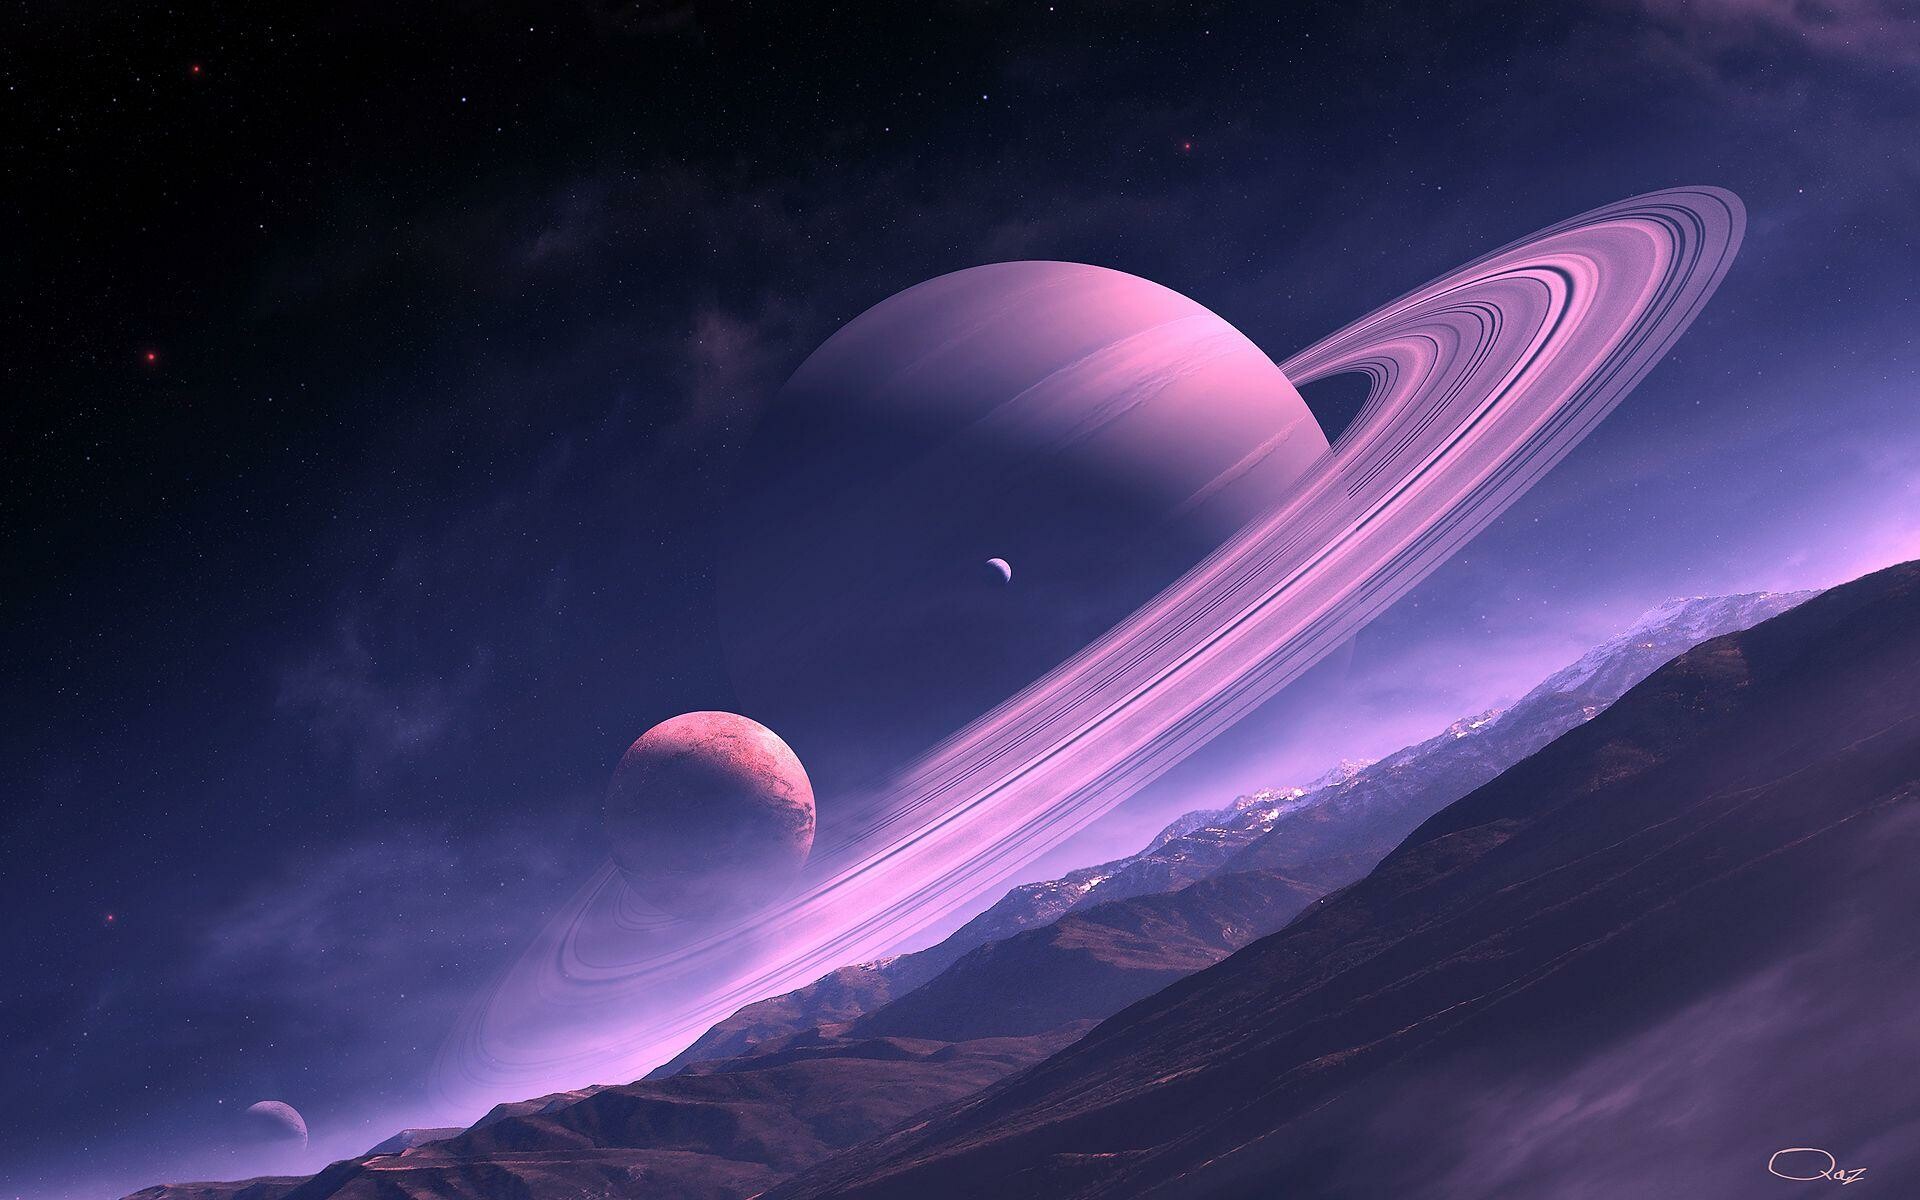 Saturn: A 'gas giant' planet, with an iron-nickel core surrounded by metallic hydrogen. 1920x1200 HD Wallpaper.